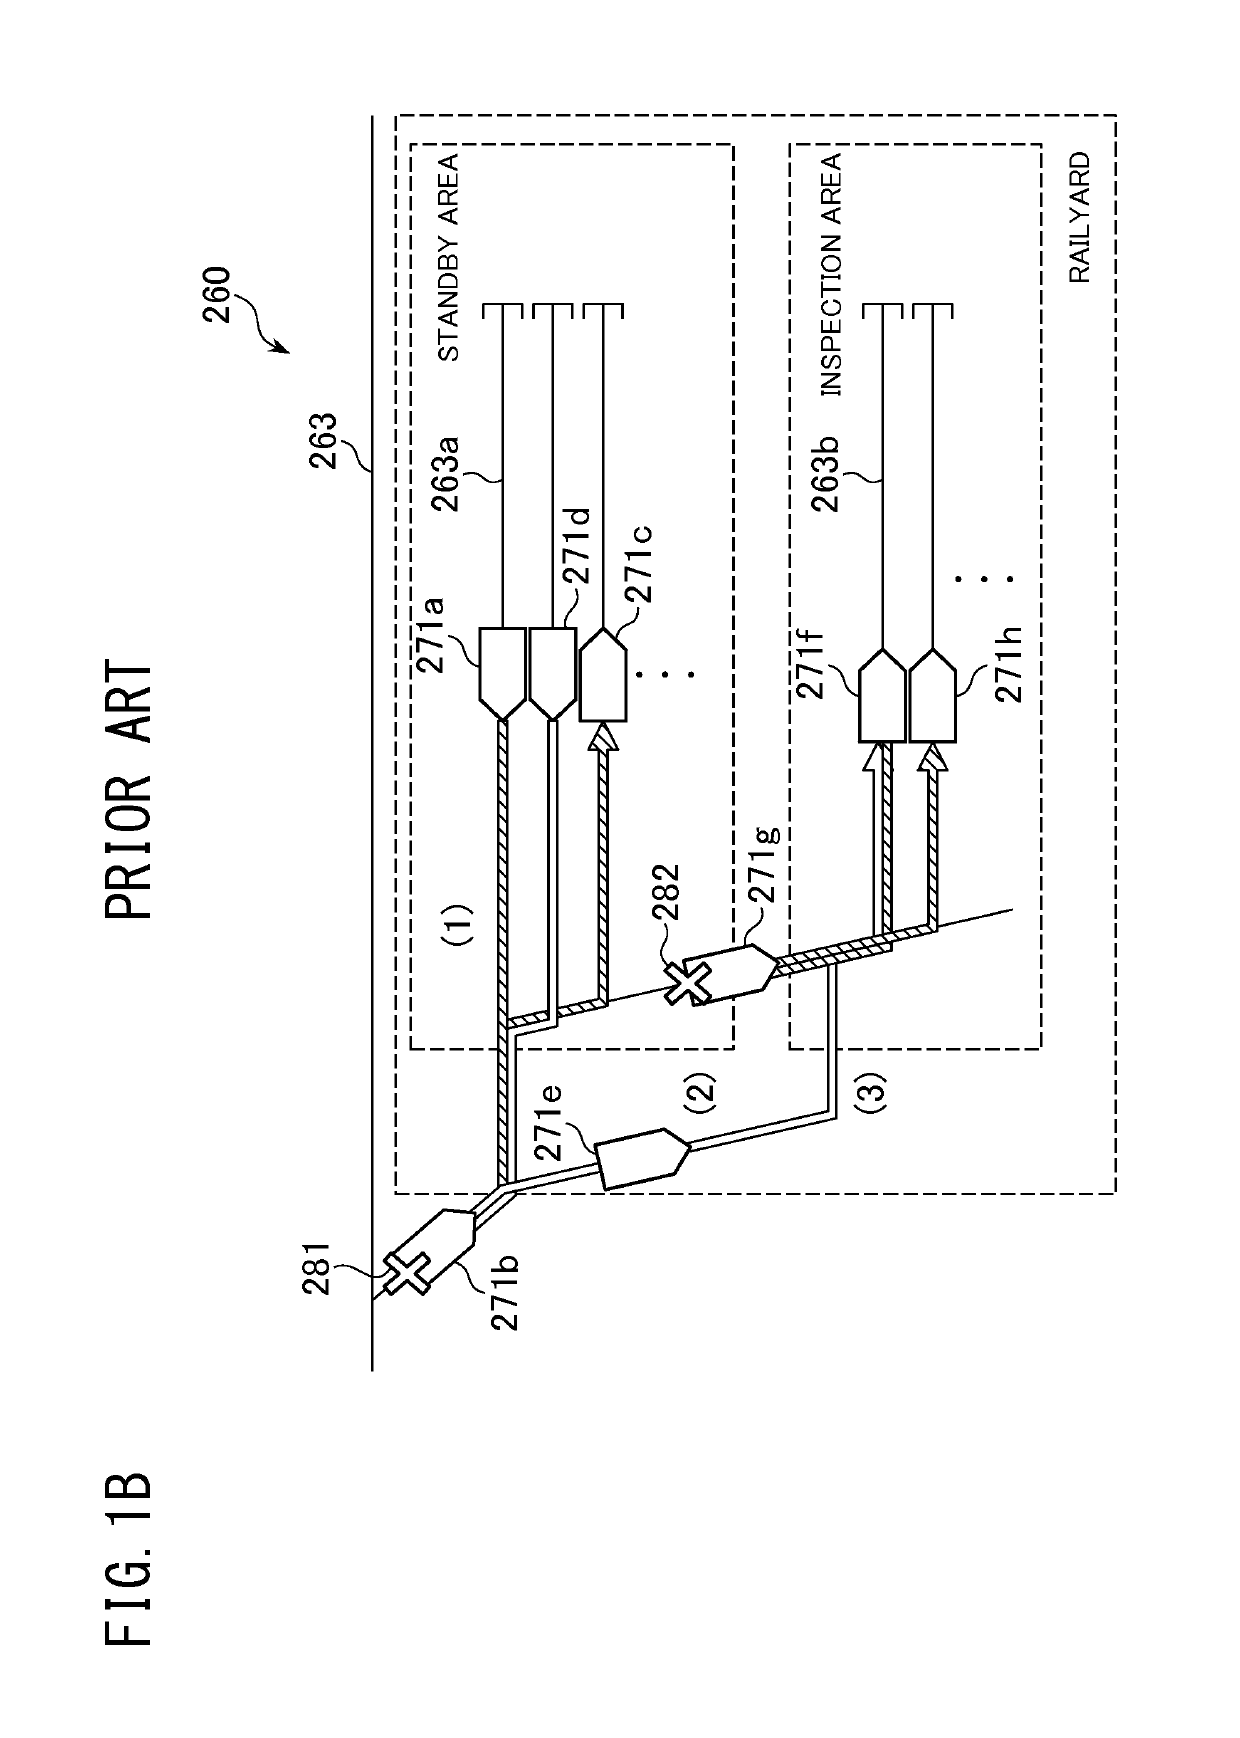 On-board device, signaling system, and control method of moving vehicle